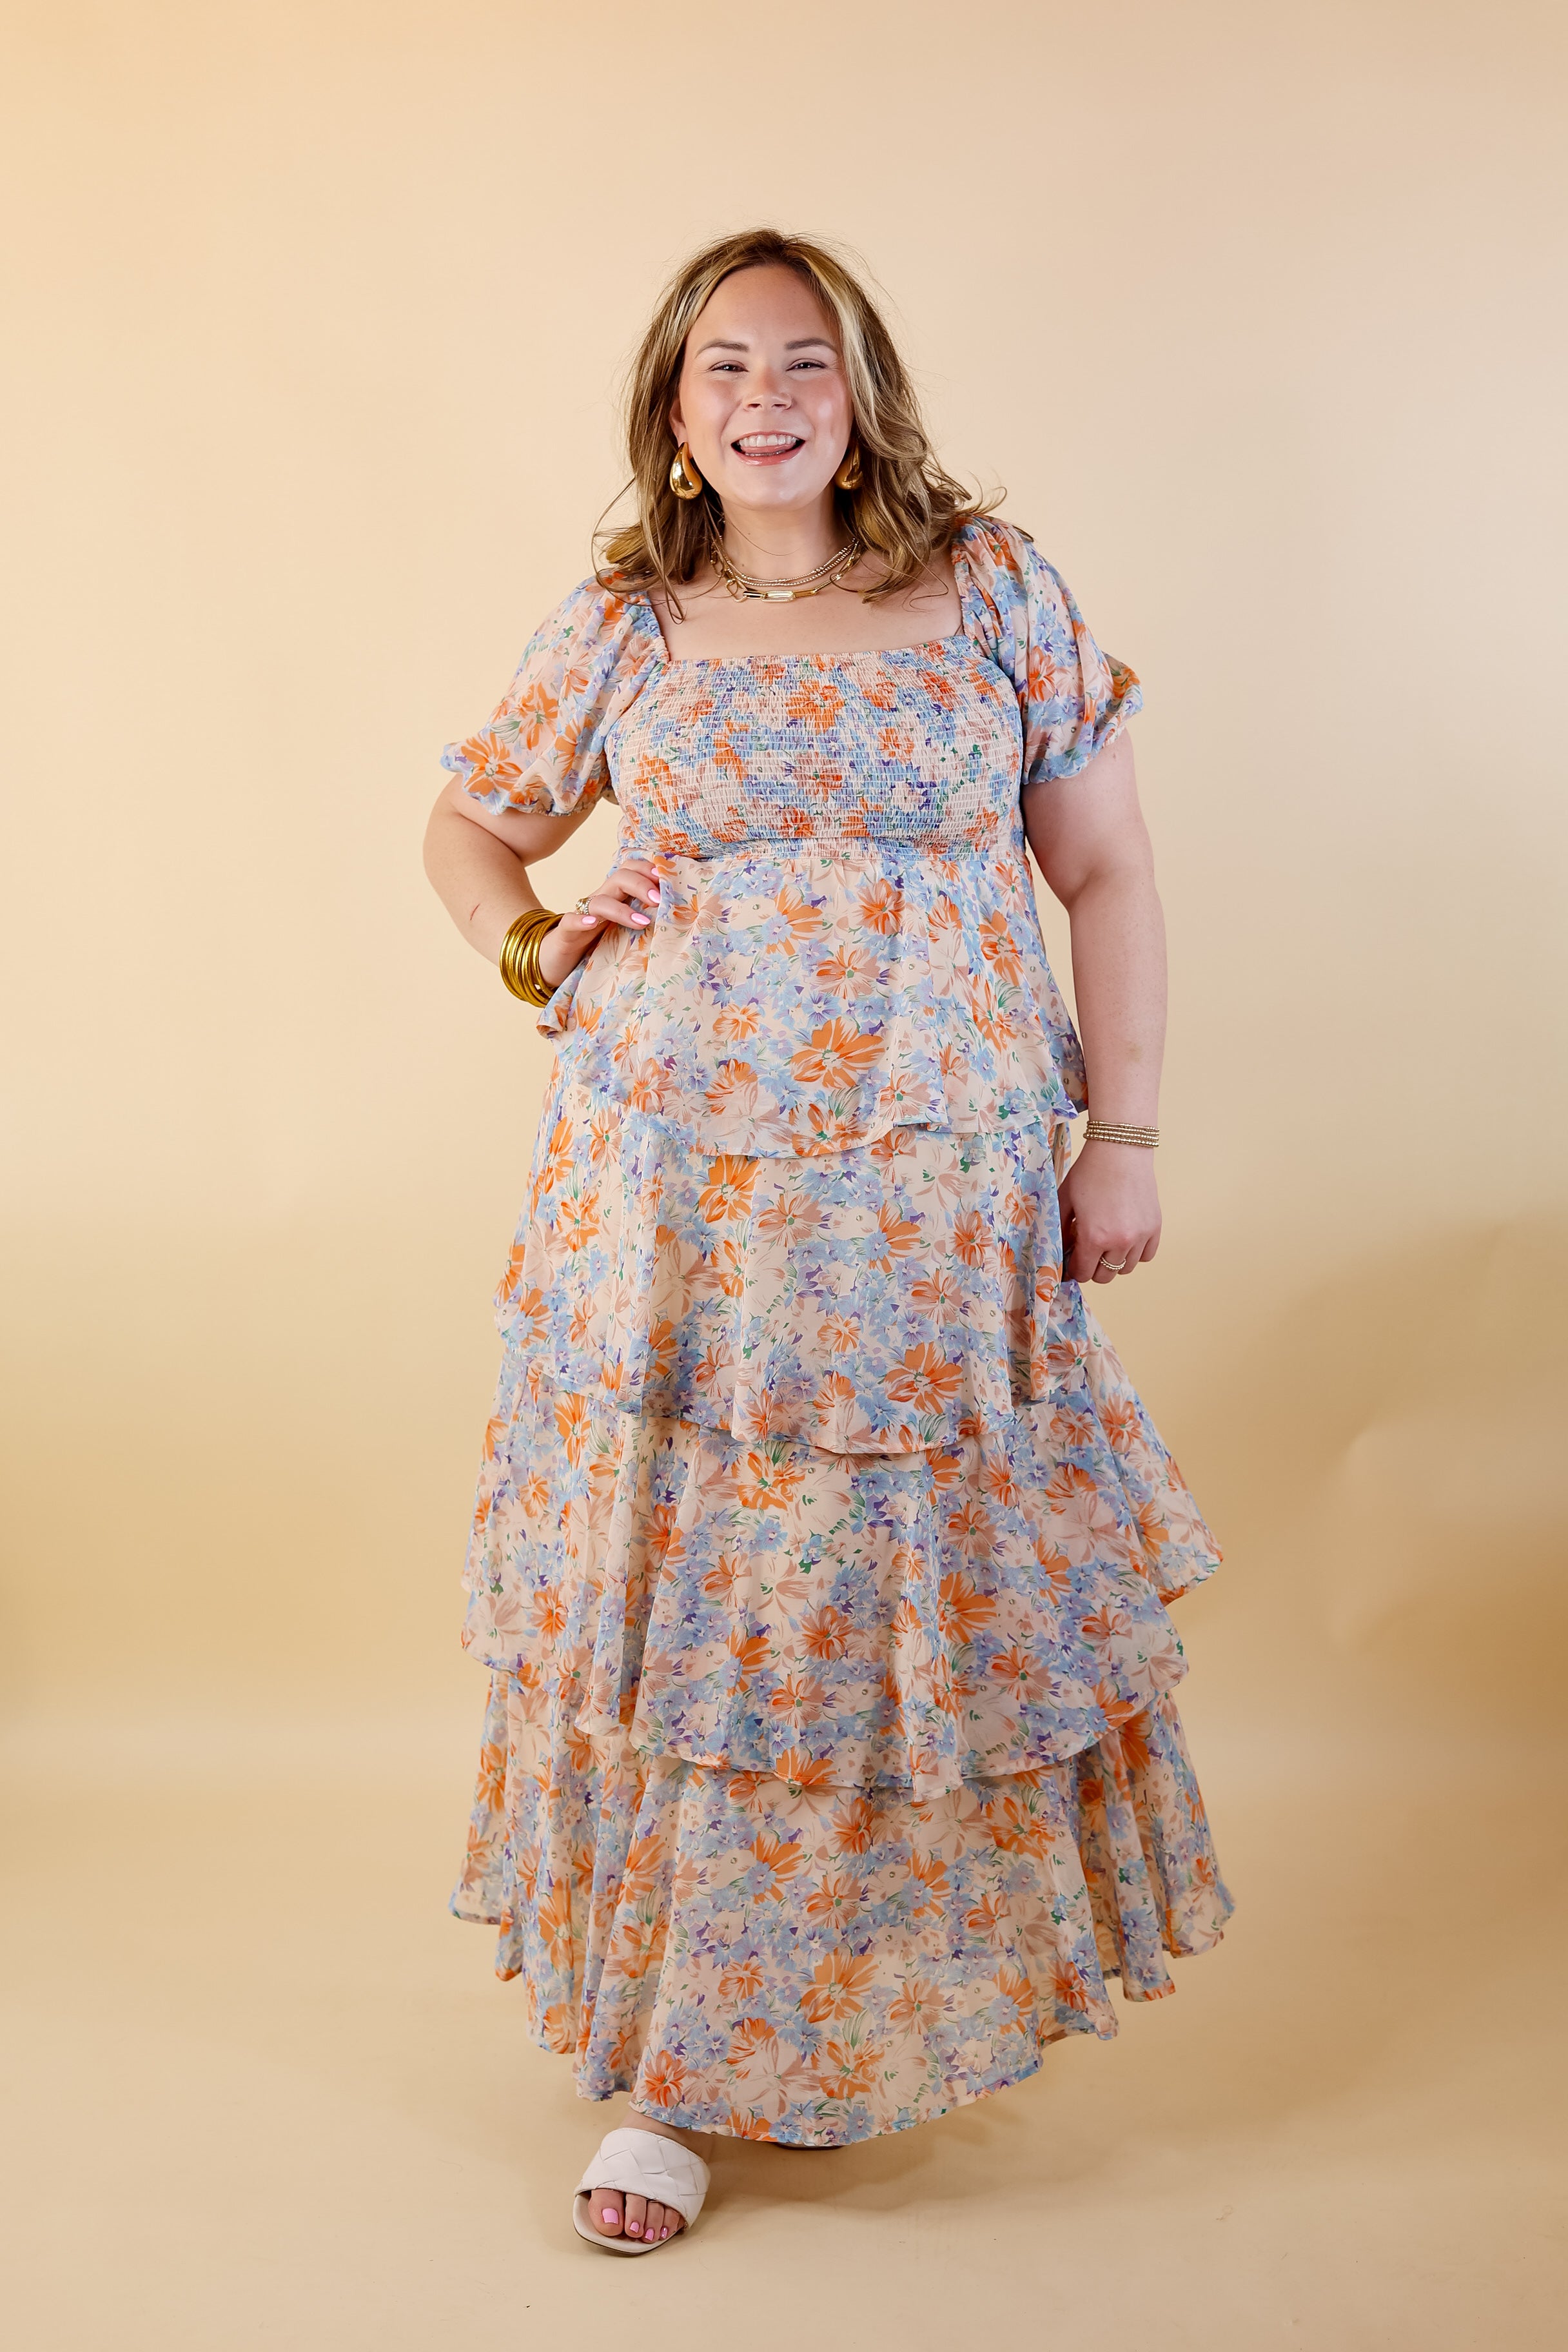 Fun Feeling Floral Tiered Maxi Dress with Smocked Balloon Sleeves in Orange Mix - Giddy Up Glamour Boutique